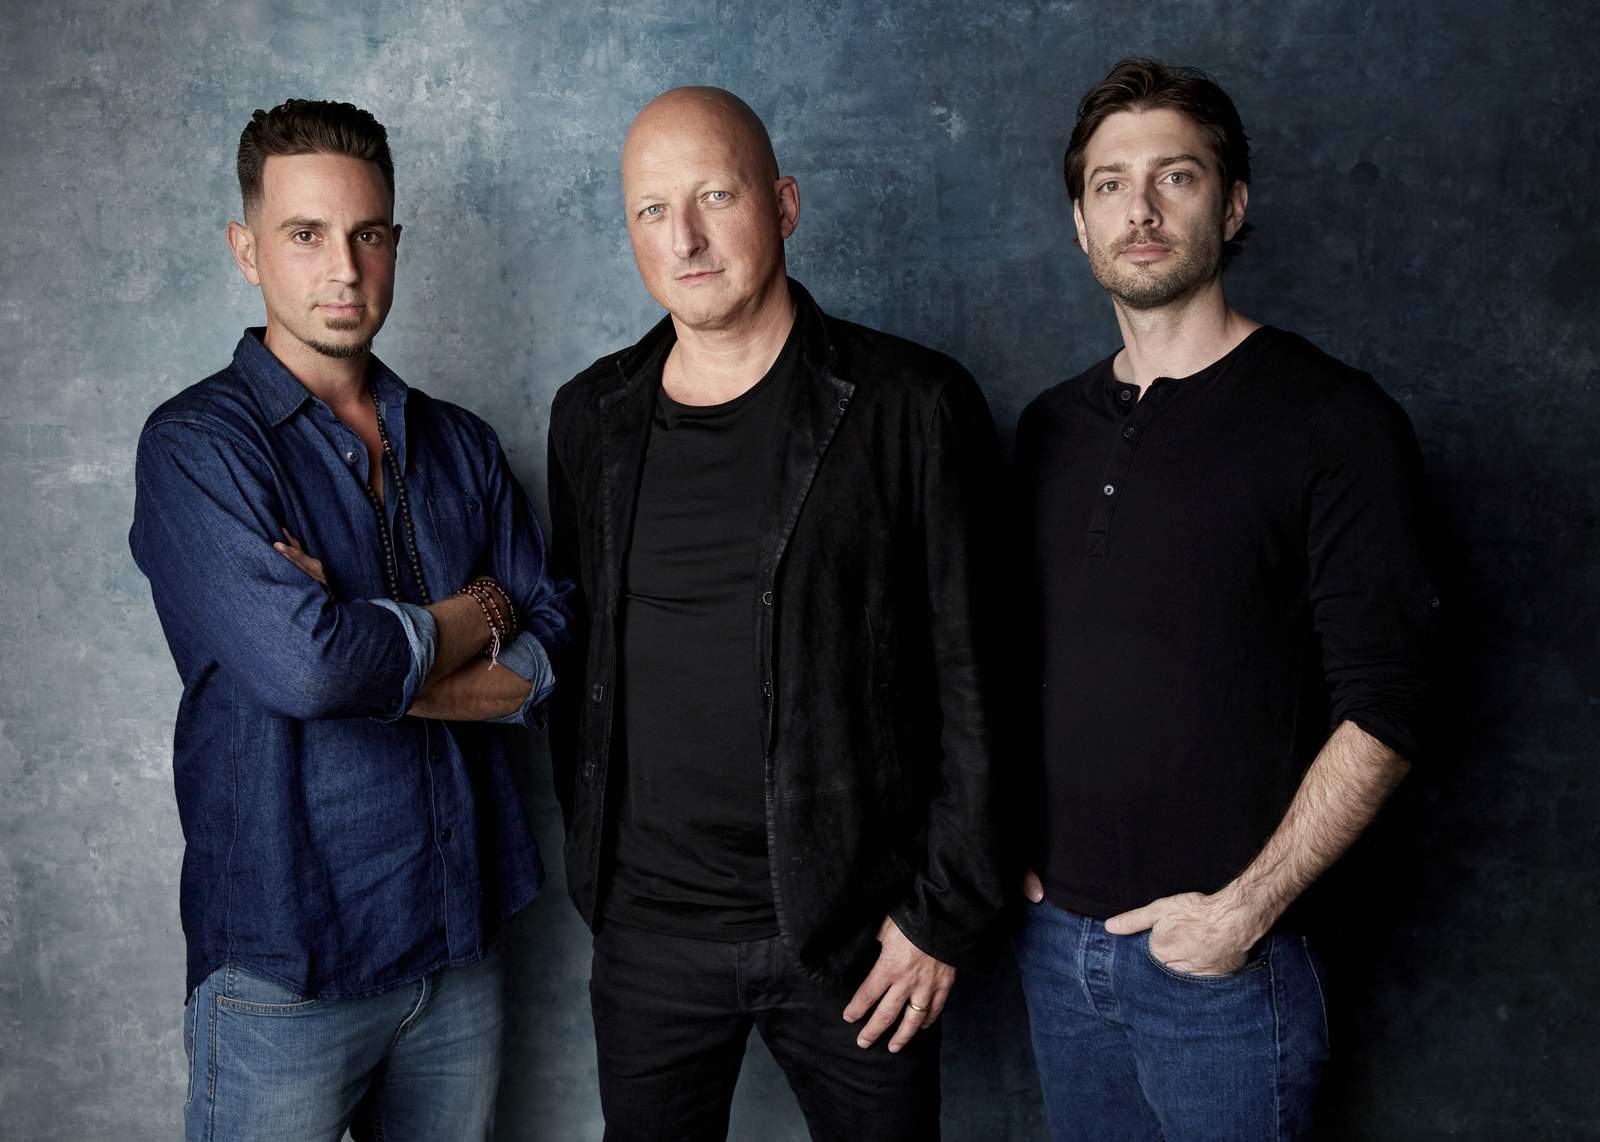 Appeals court sends ‘Leaving Neverland’ fight to arbitration